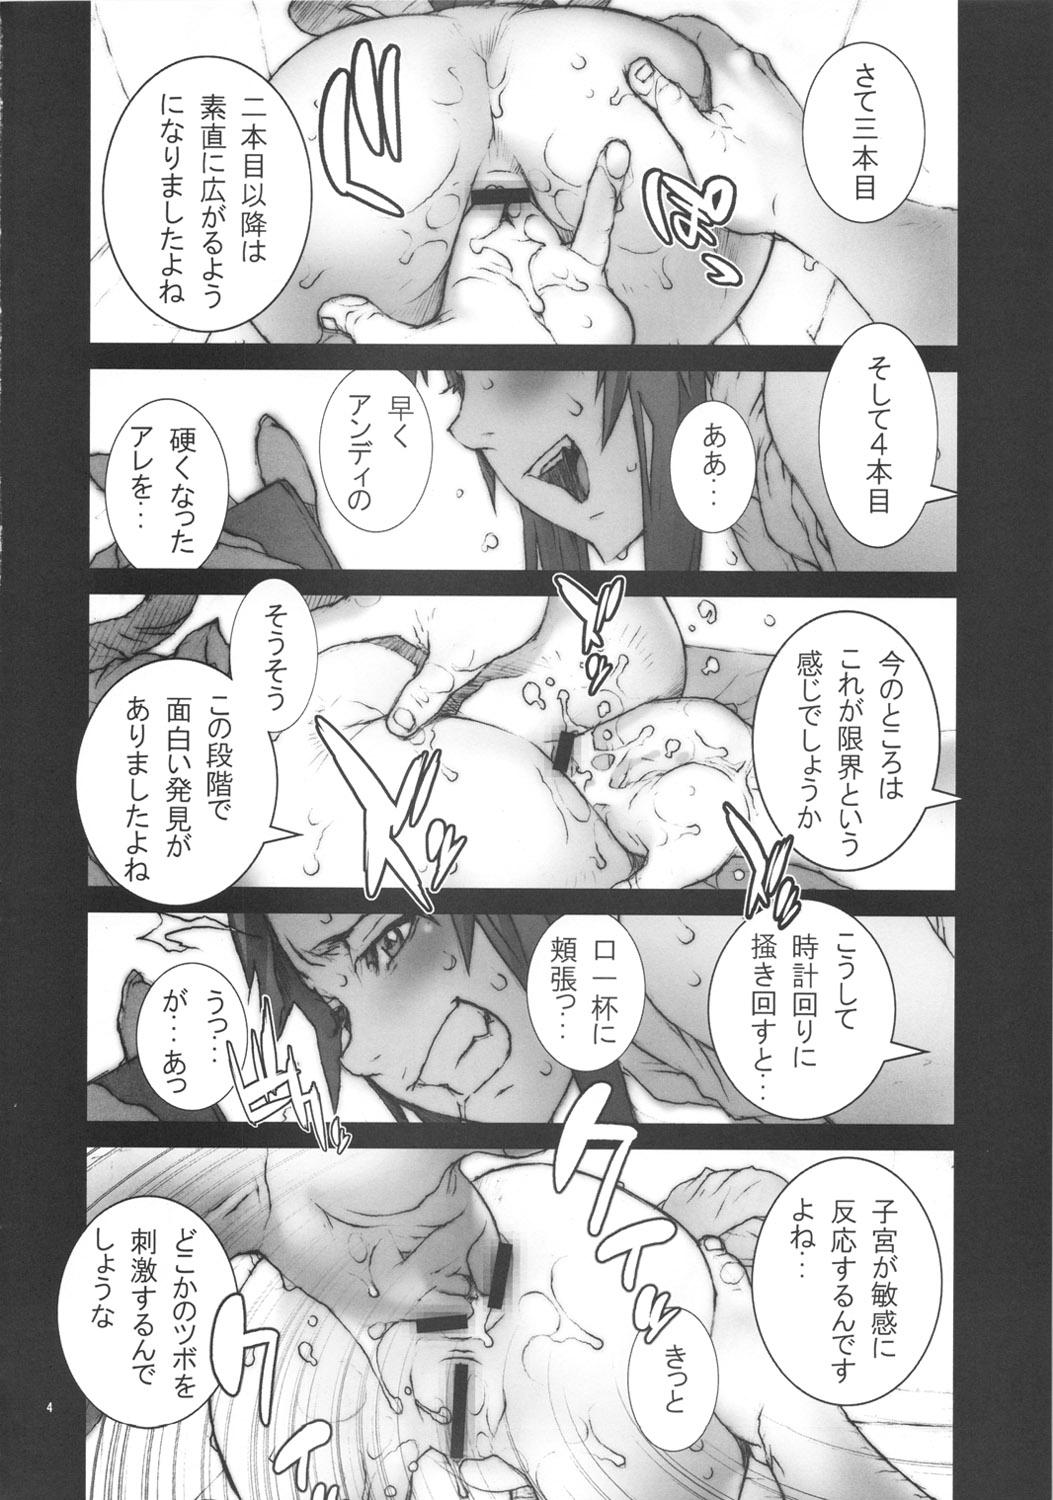 Punish Kachousen Go - King of fighters Blow Job Movies - Page 5